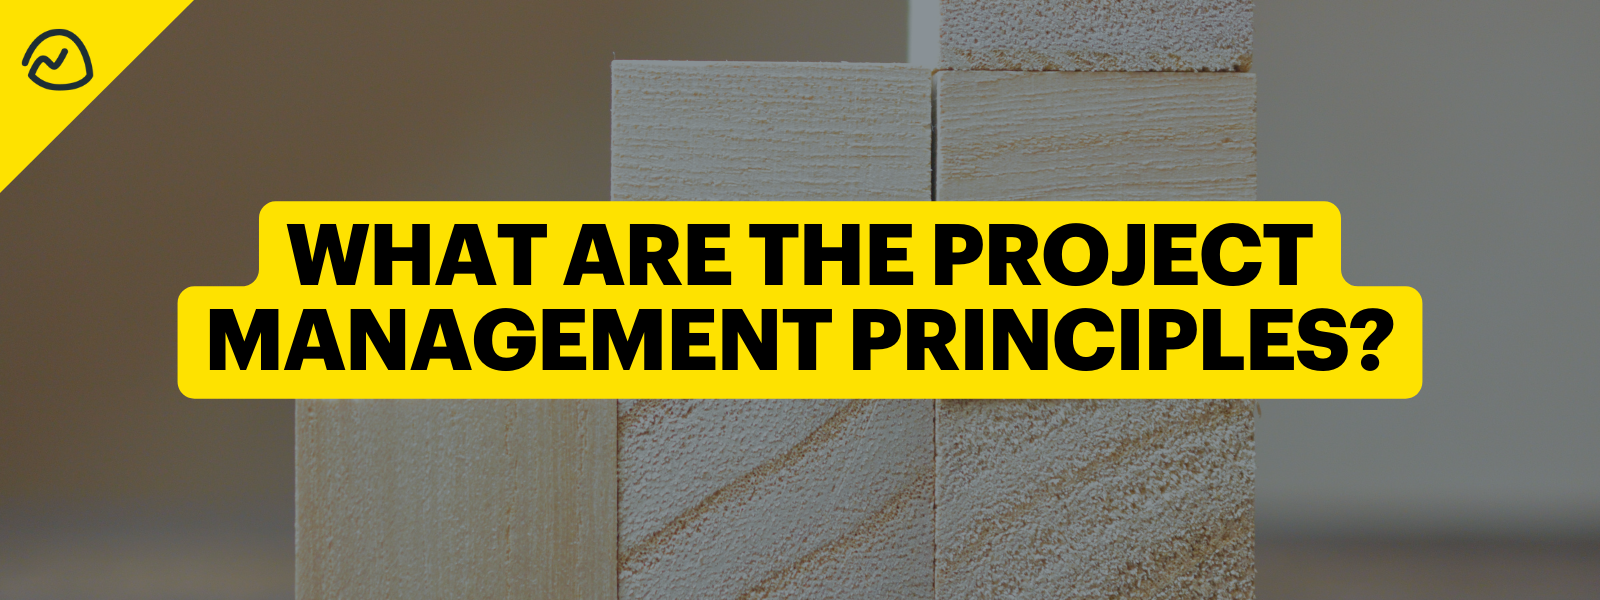 research and describe the principles of project management